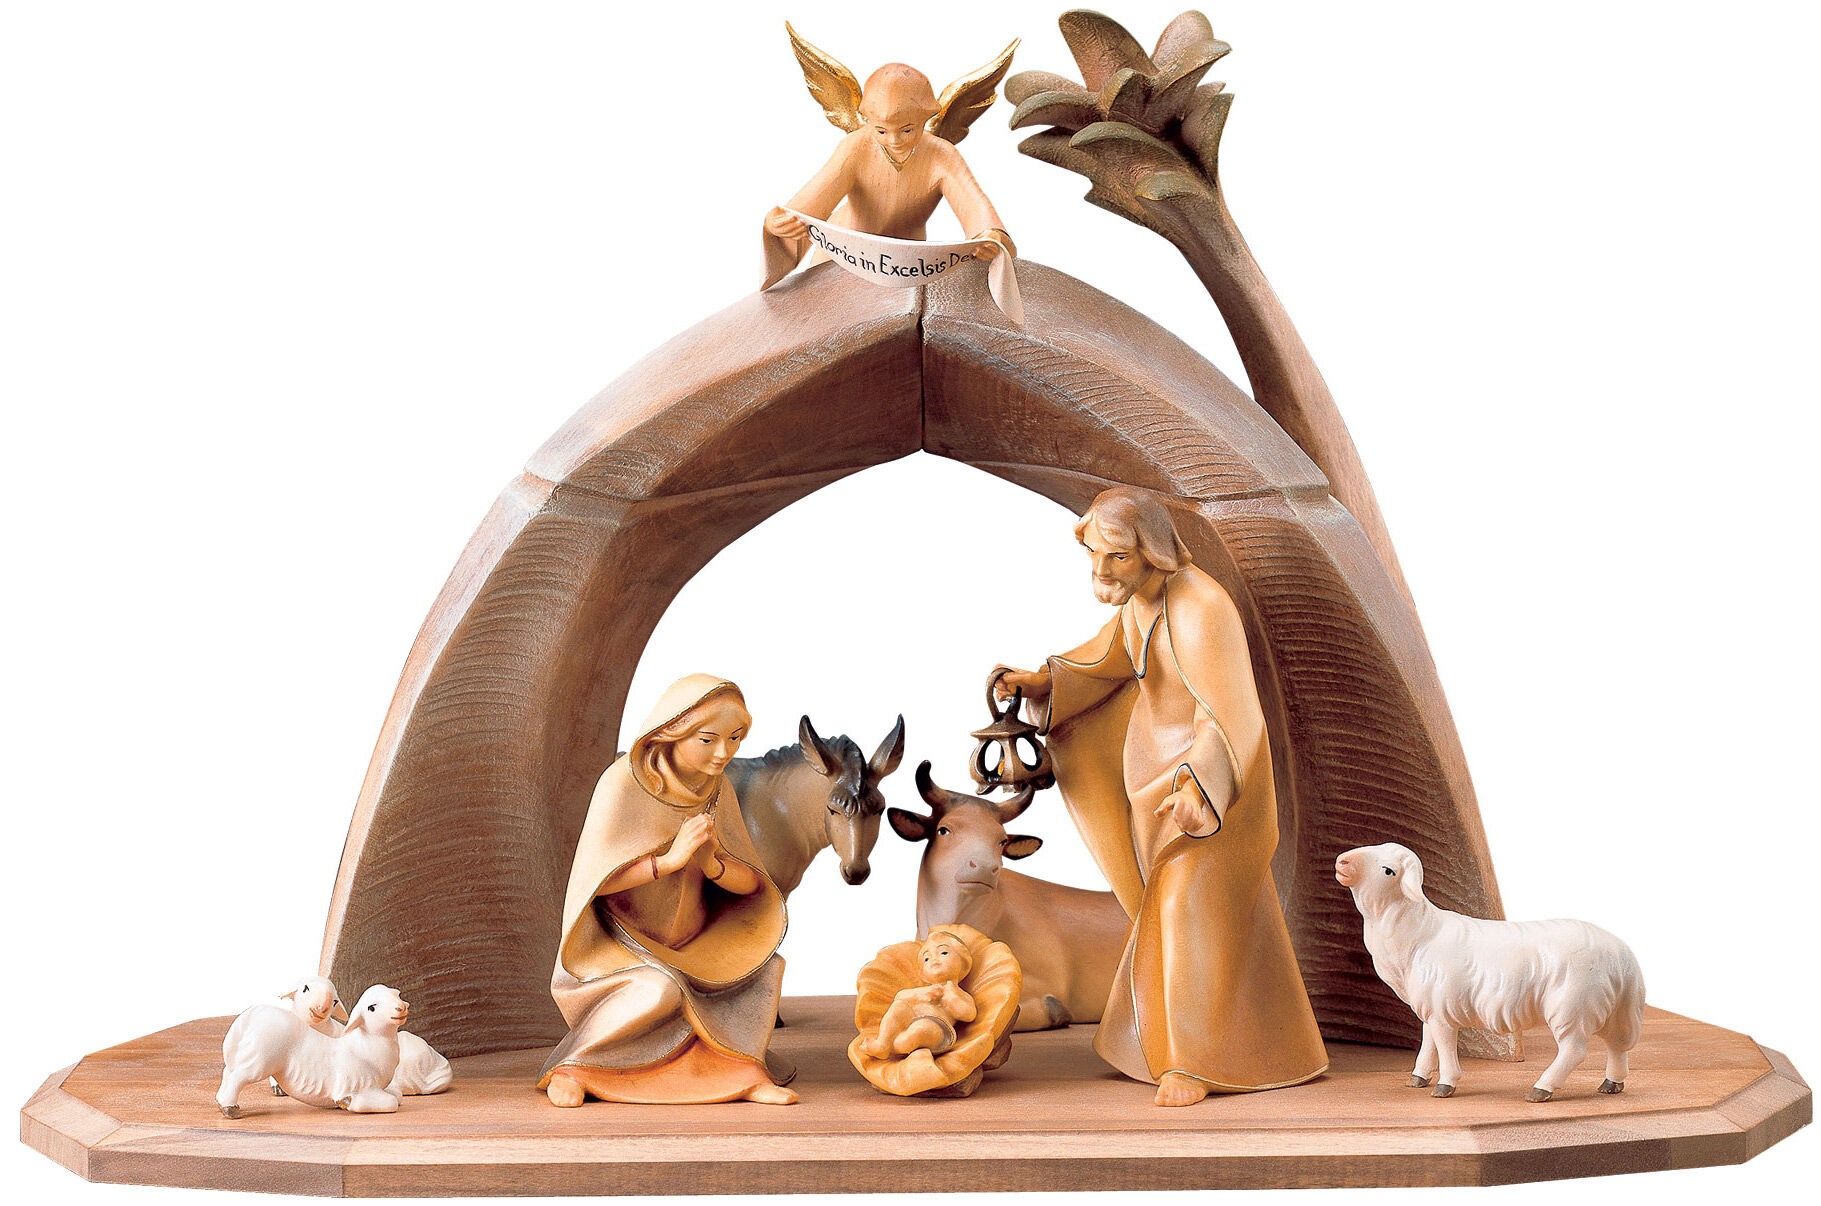 Wooden Carved Saviour Nativity, hand-painted by Ulrich Perathoner